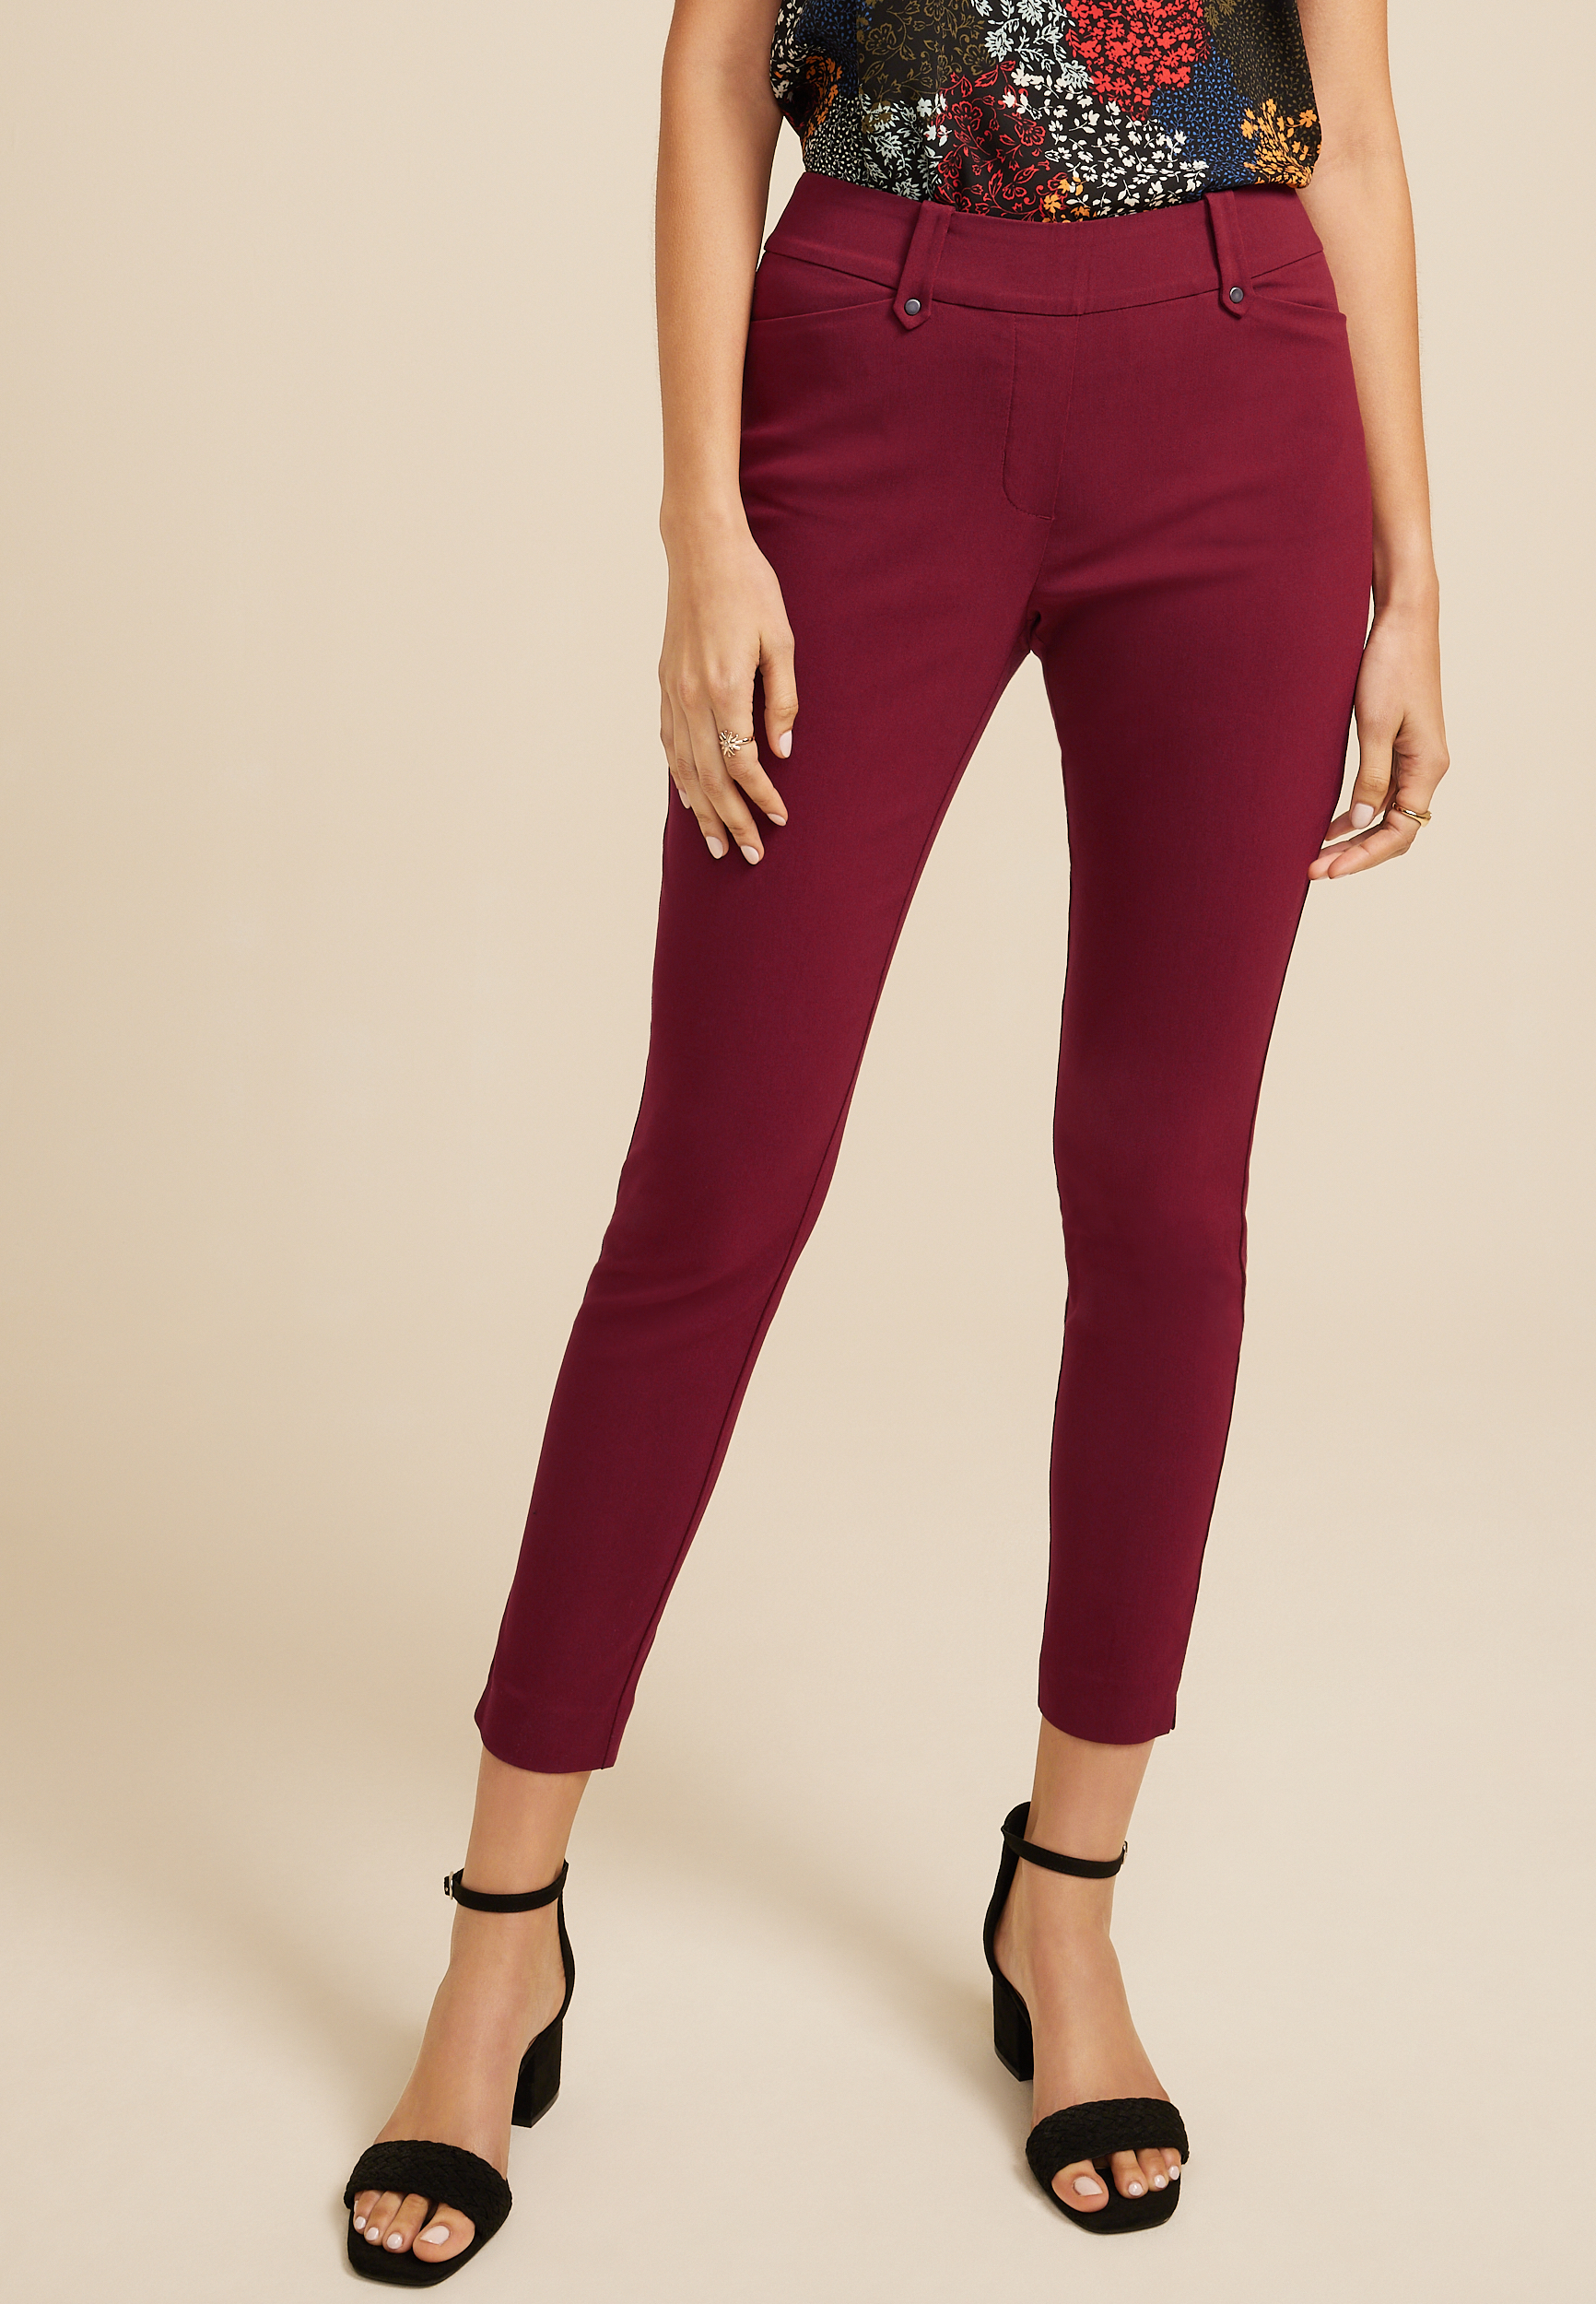 Curvy High-Waisted Pixie Skinny Ankle Pants for Women